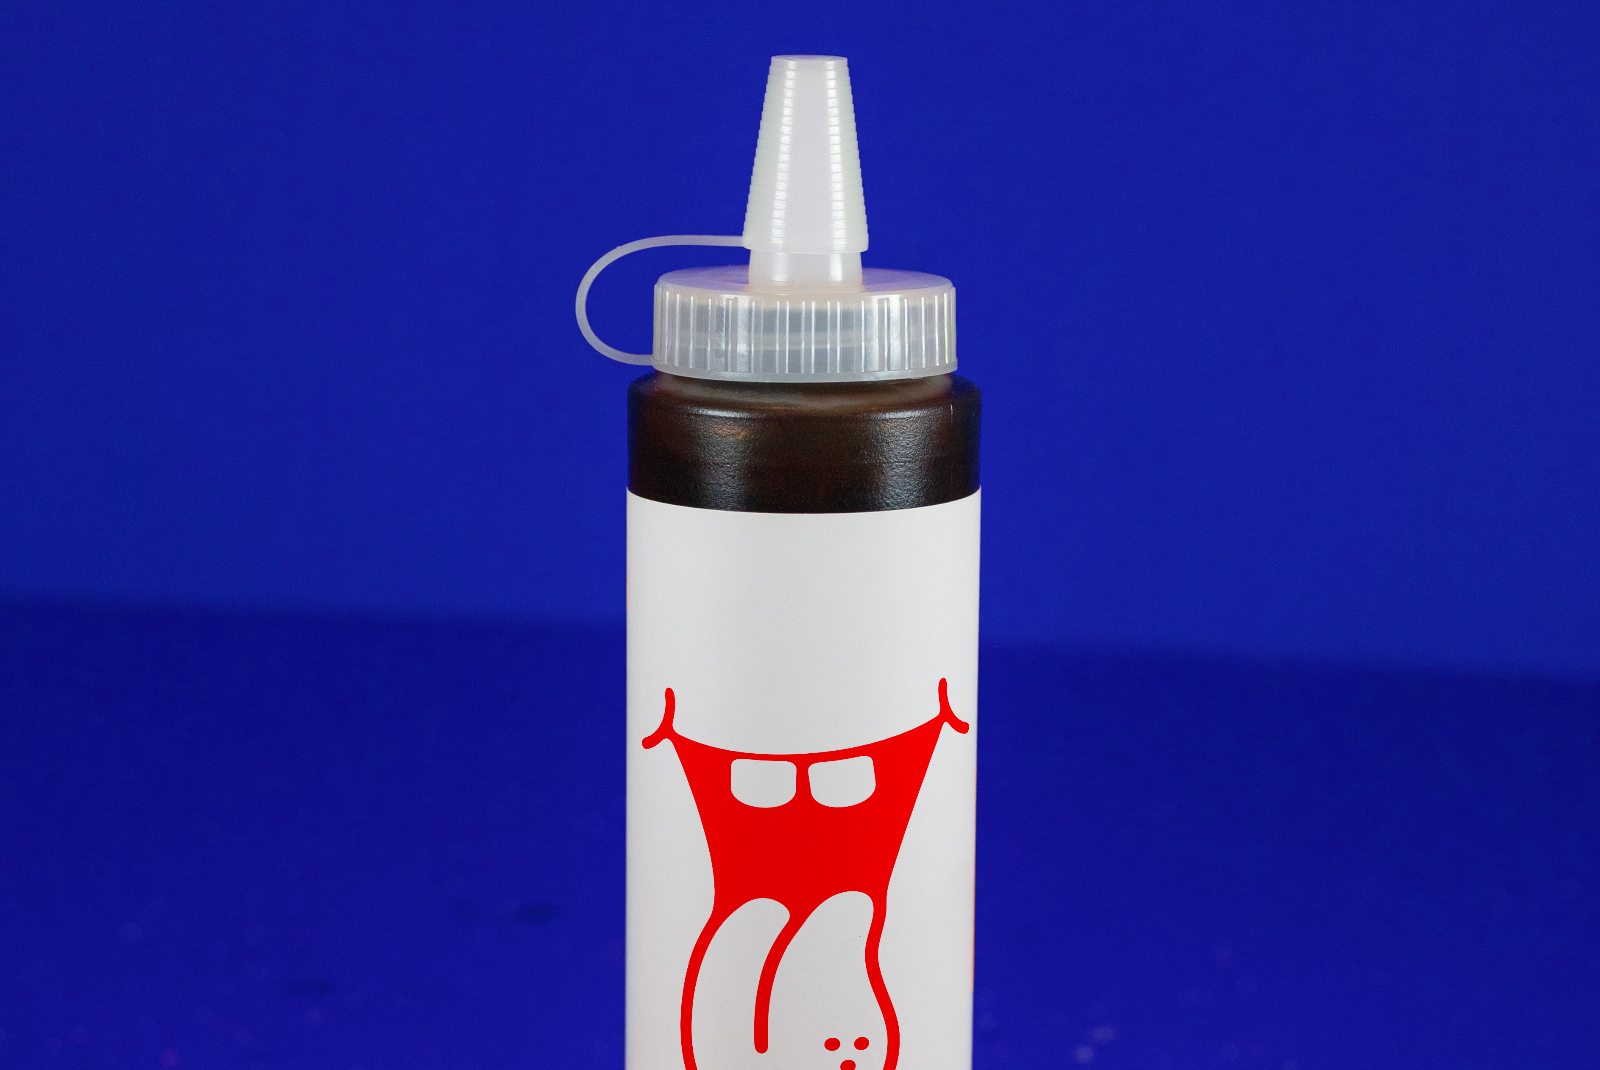 High-quality mockup of glue bottle with red label design on blue background, perfect for presentations and product branding.